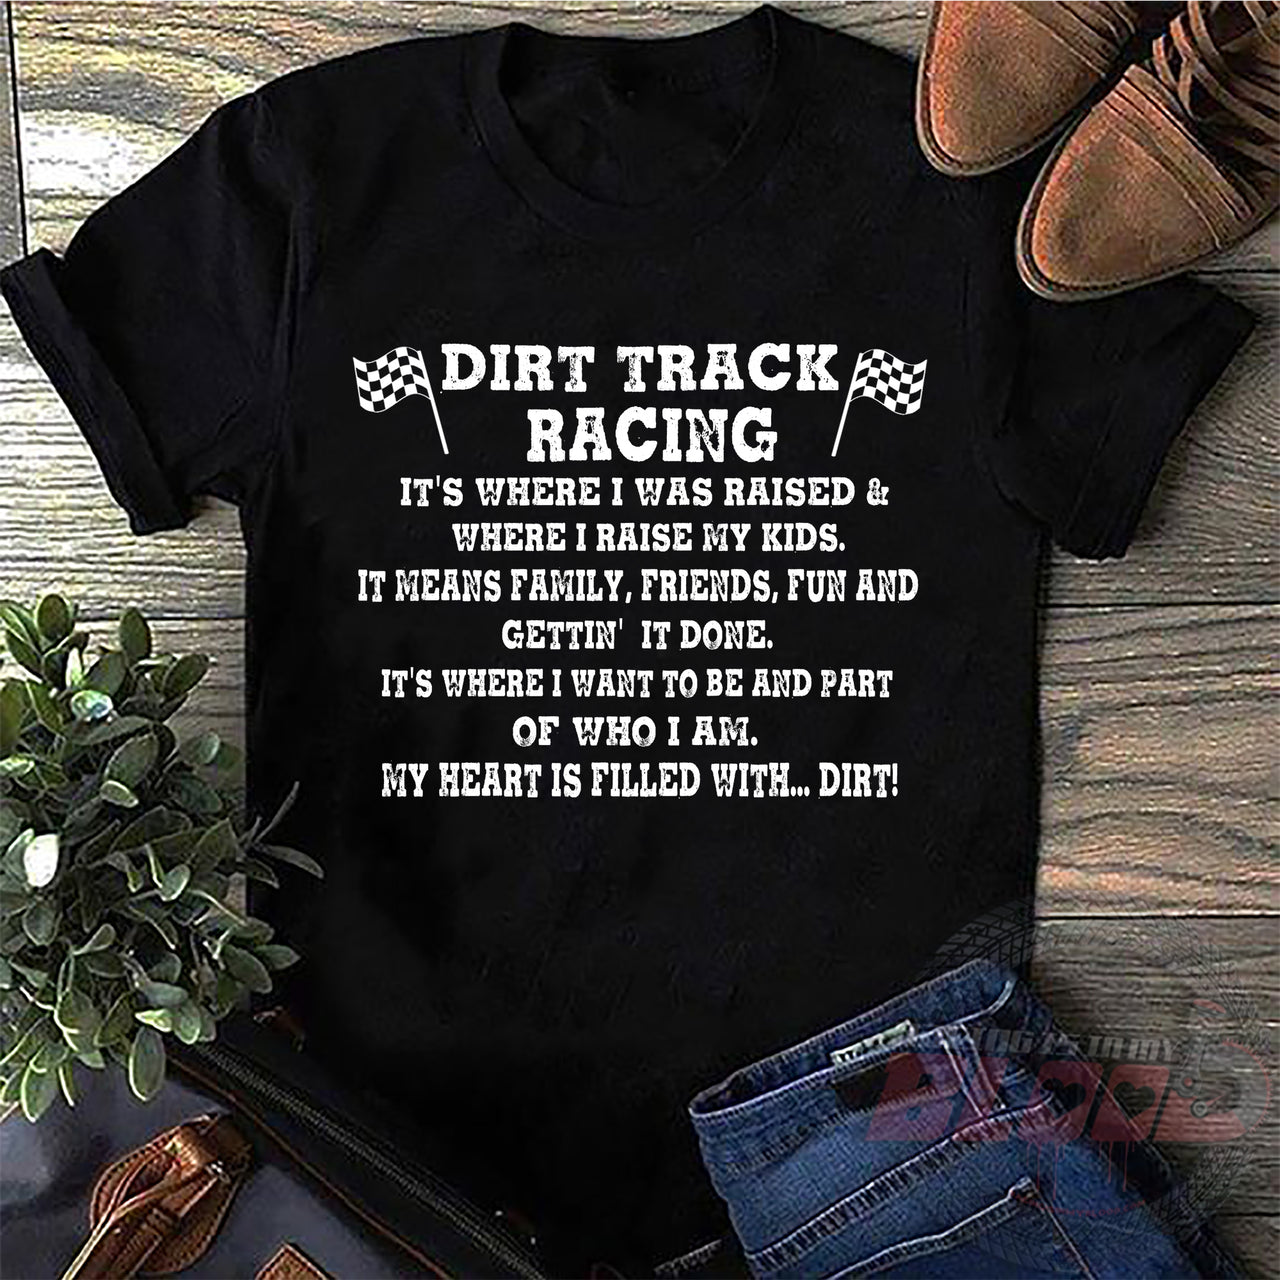 Dirt Track Racing It's Where I Was Raised Apparel.